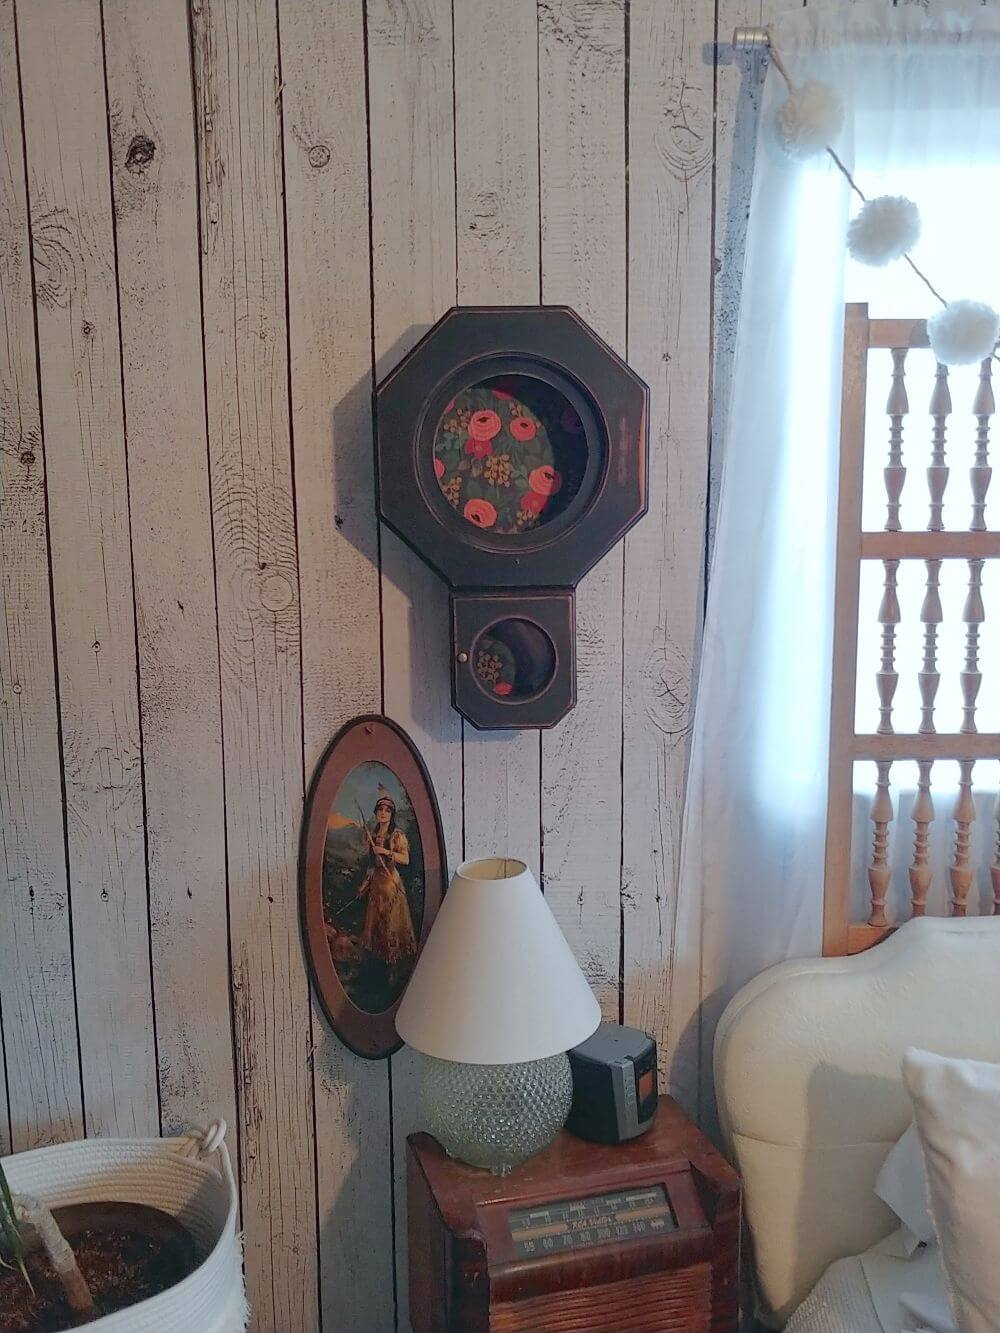 Upcycled Clock Shelf - 7 Days of Thrift Shop Flips - Day Five